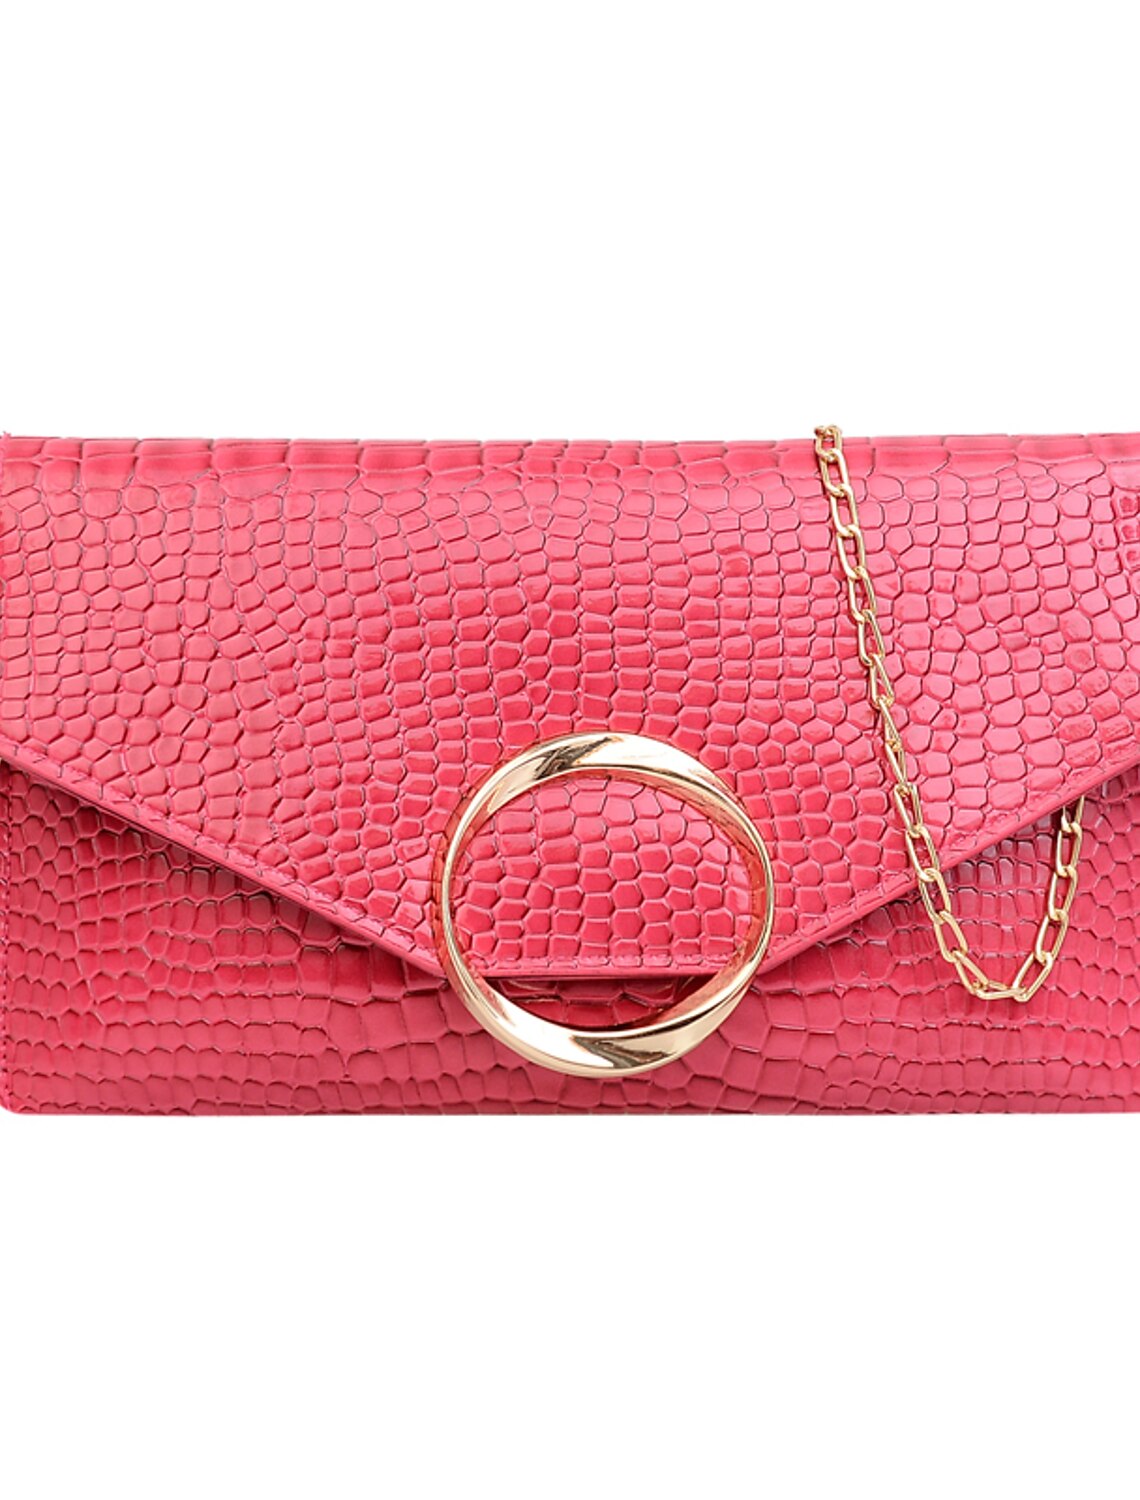 Women's Crossbody Bag PU Leather Party / Evening Going out Chain Solid